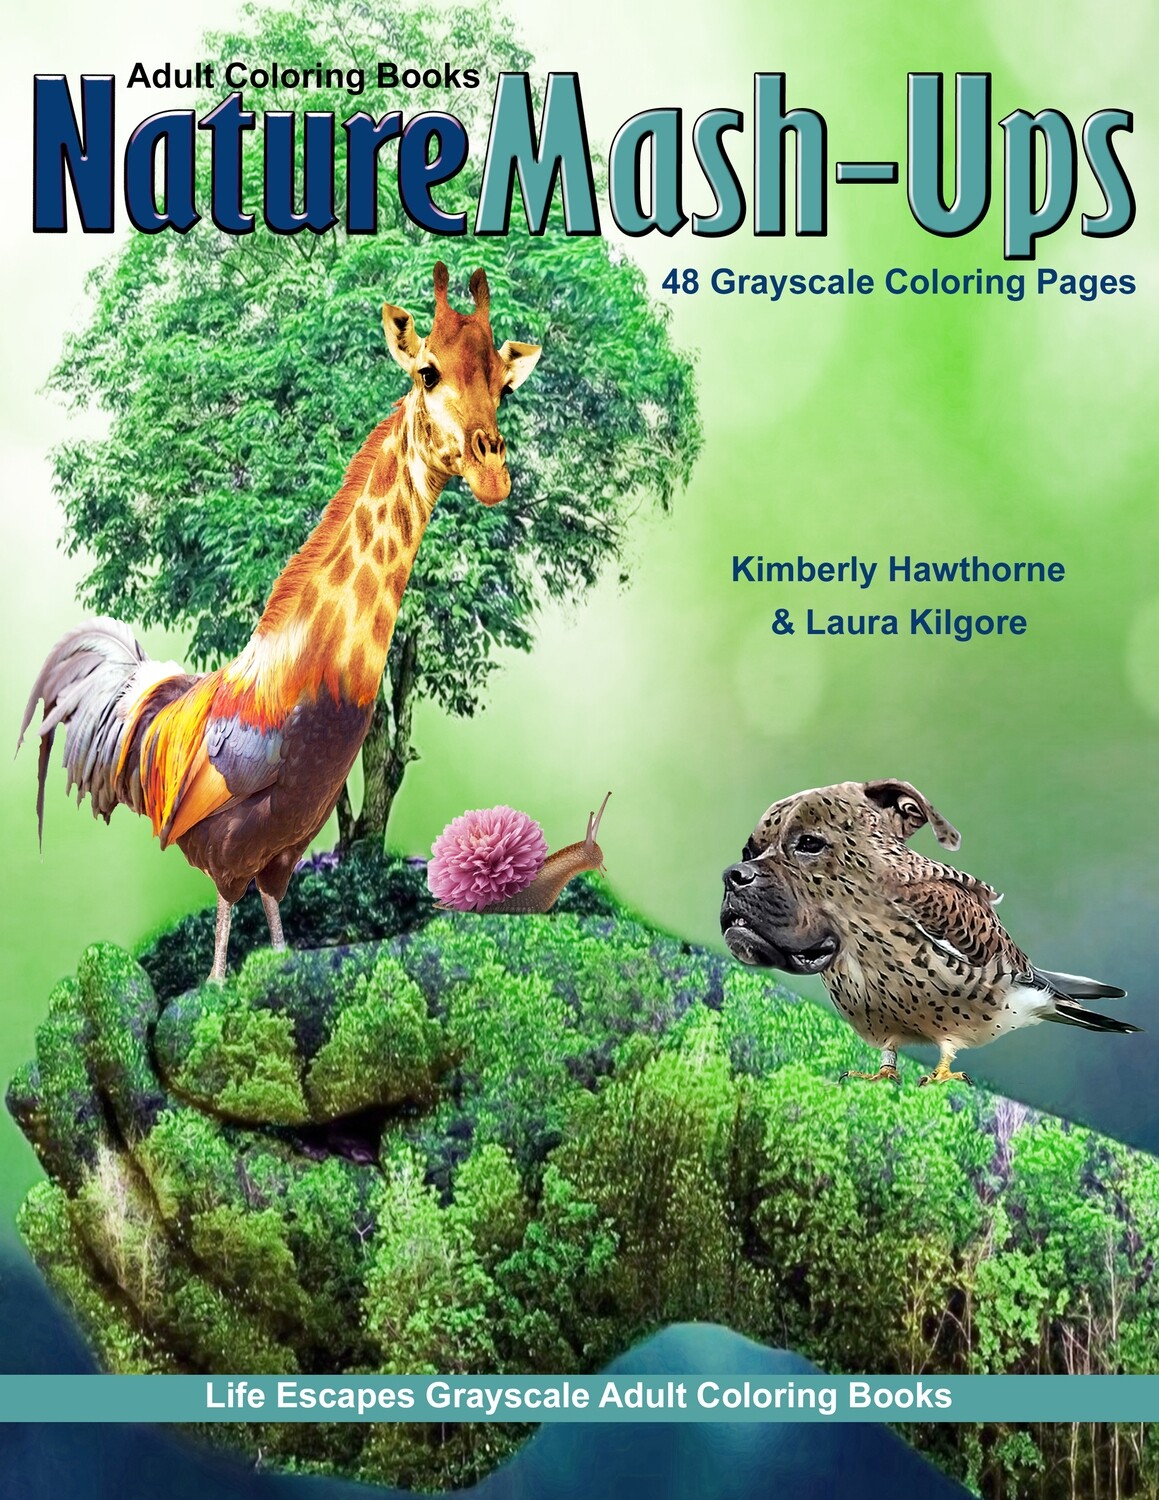 Nature Mashups Grayscale Adult Coloring Book PDF by Kimberly